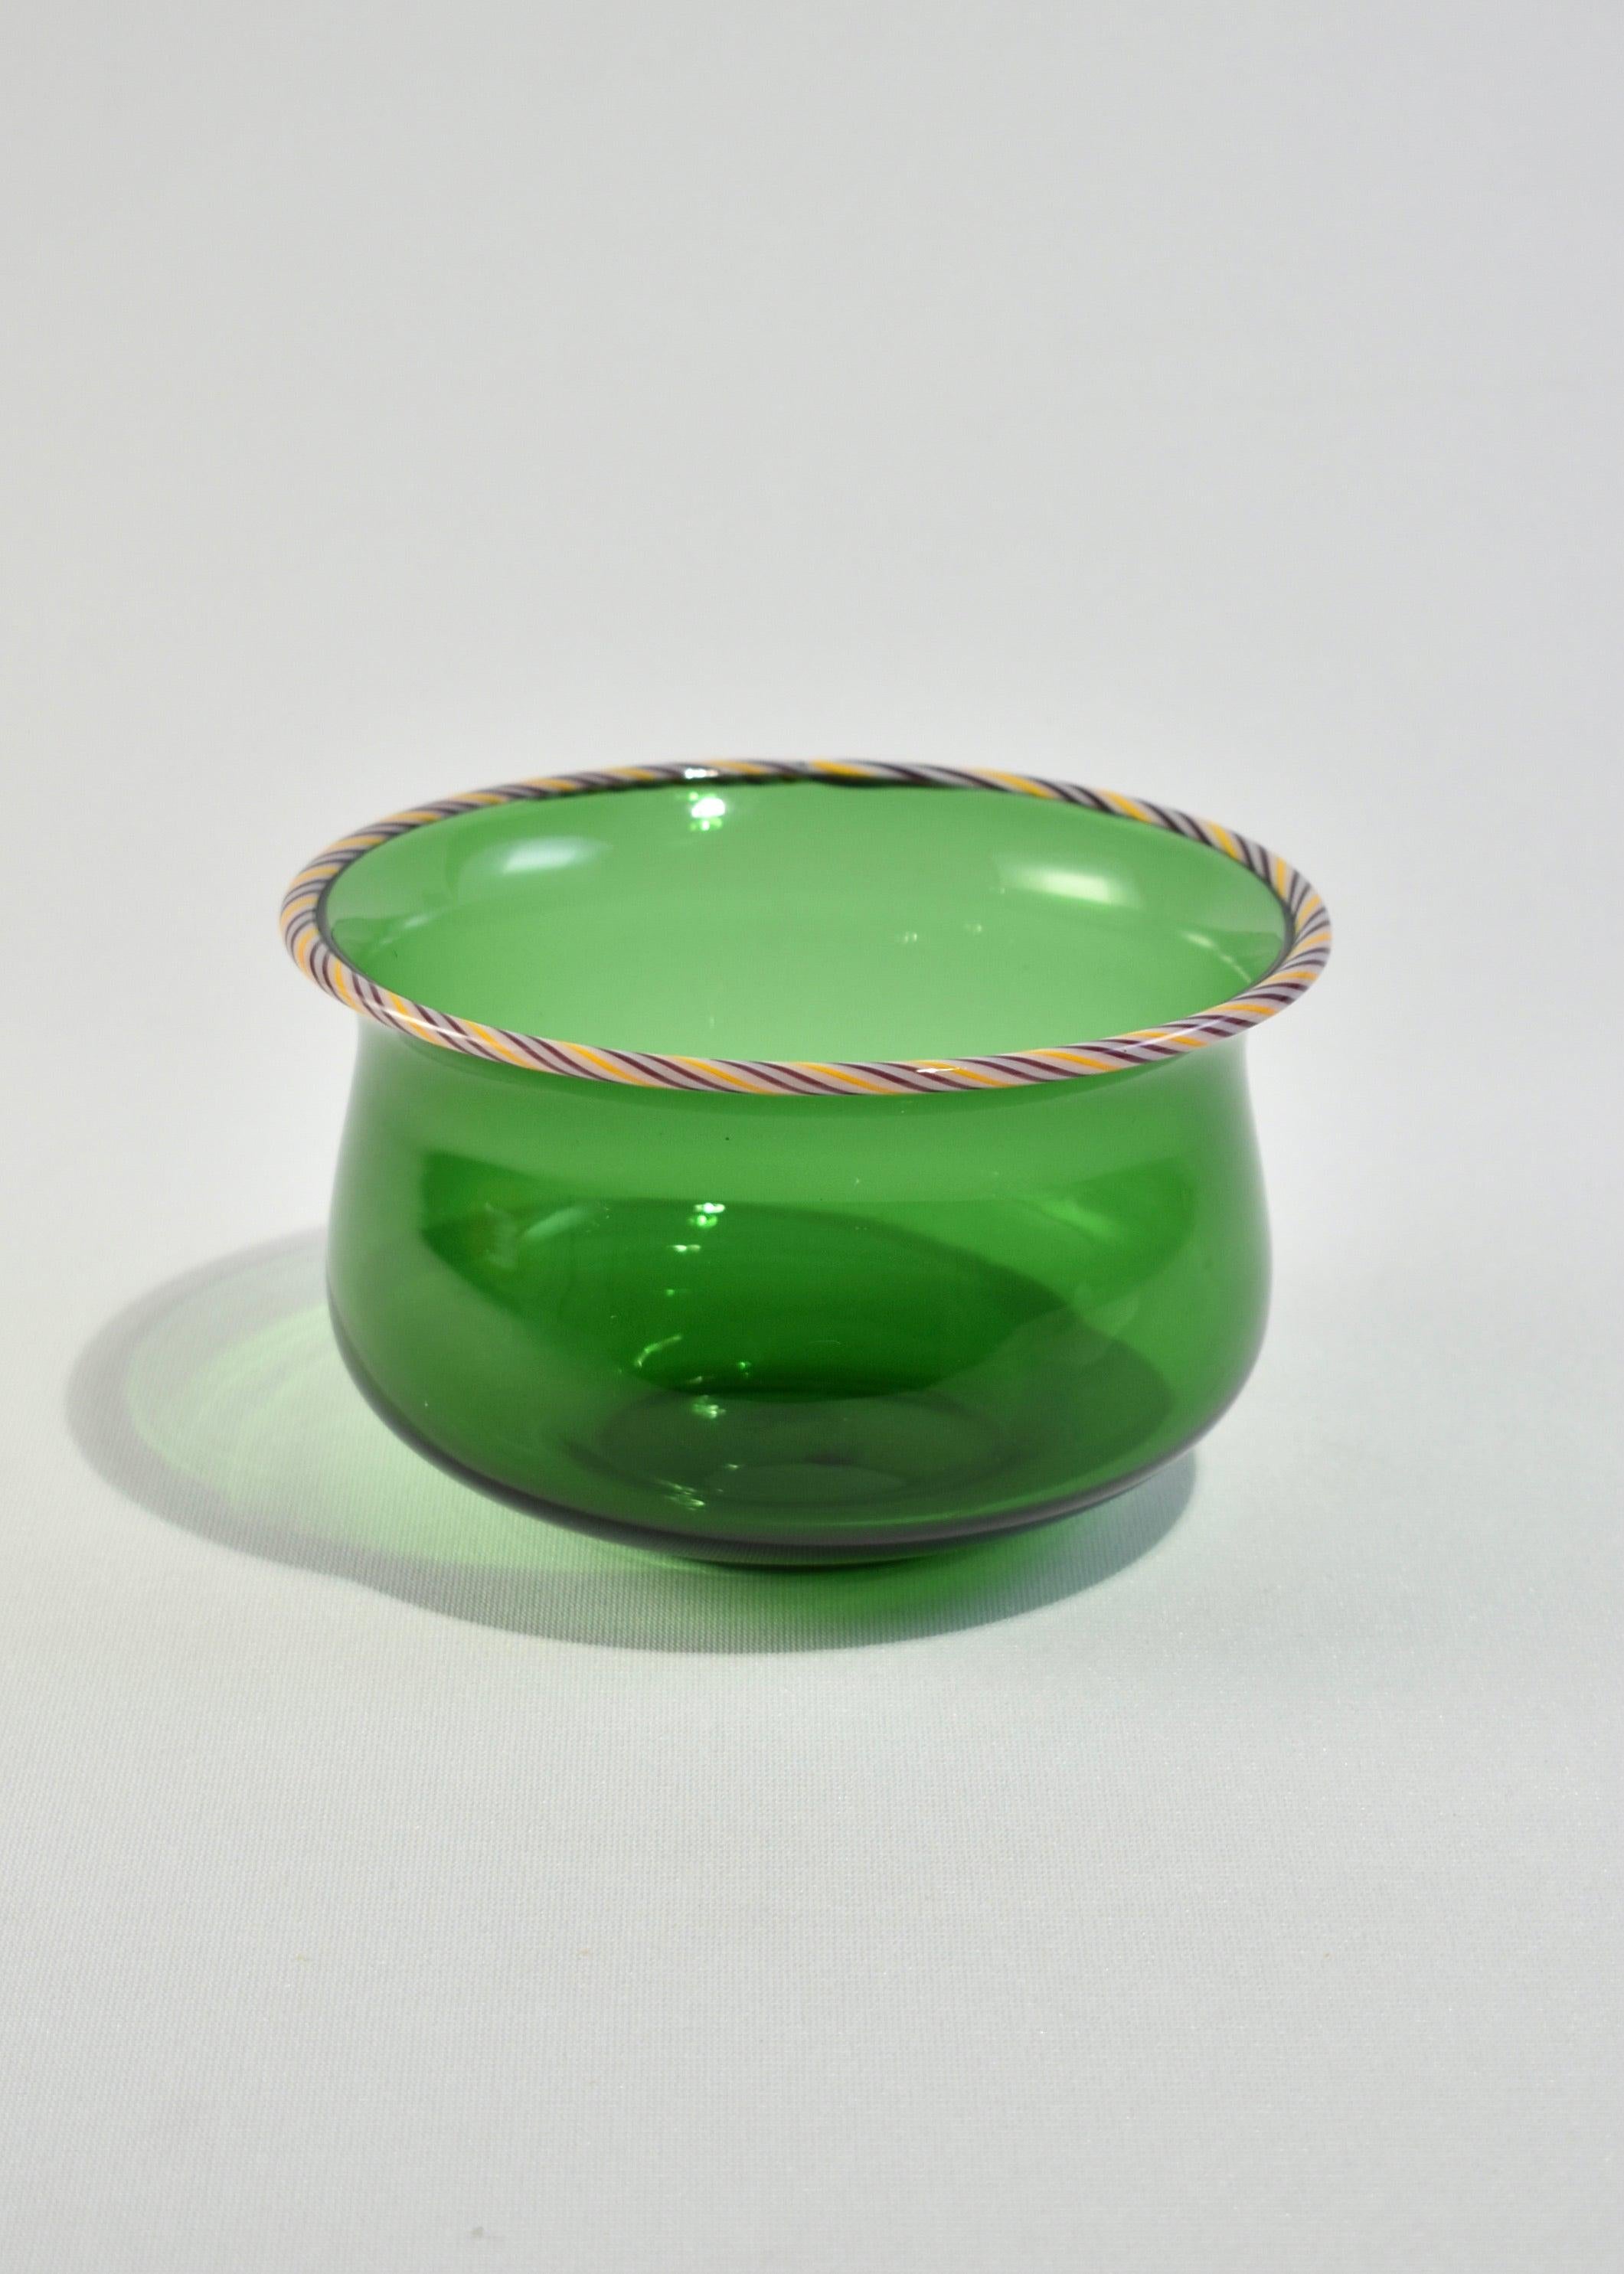 Vintage blown glass bowl in a beautiful green color with purple and yellow twisted cane trim.